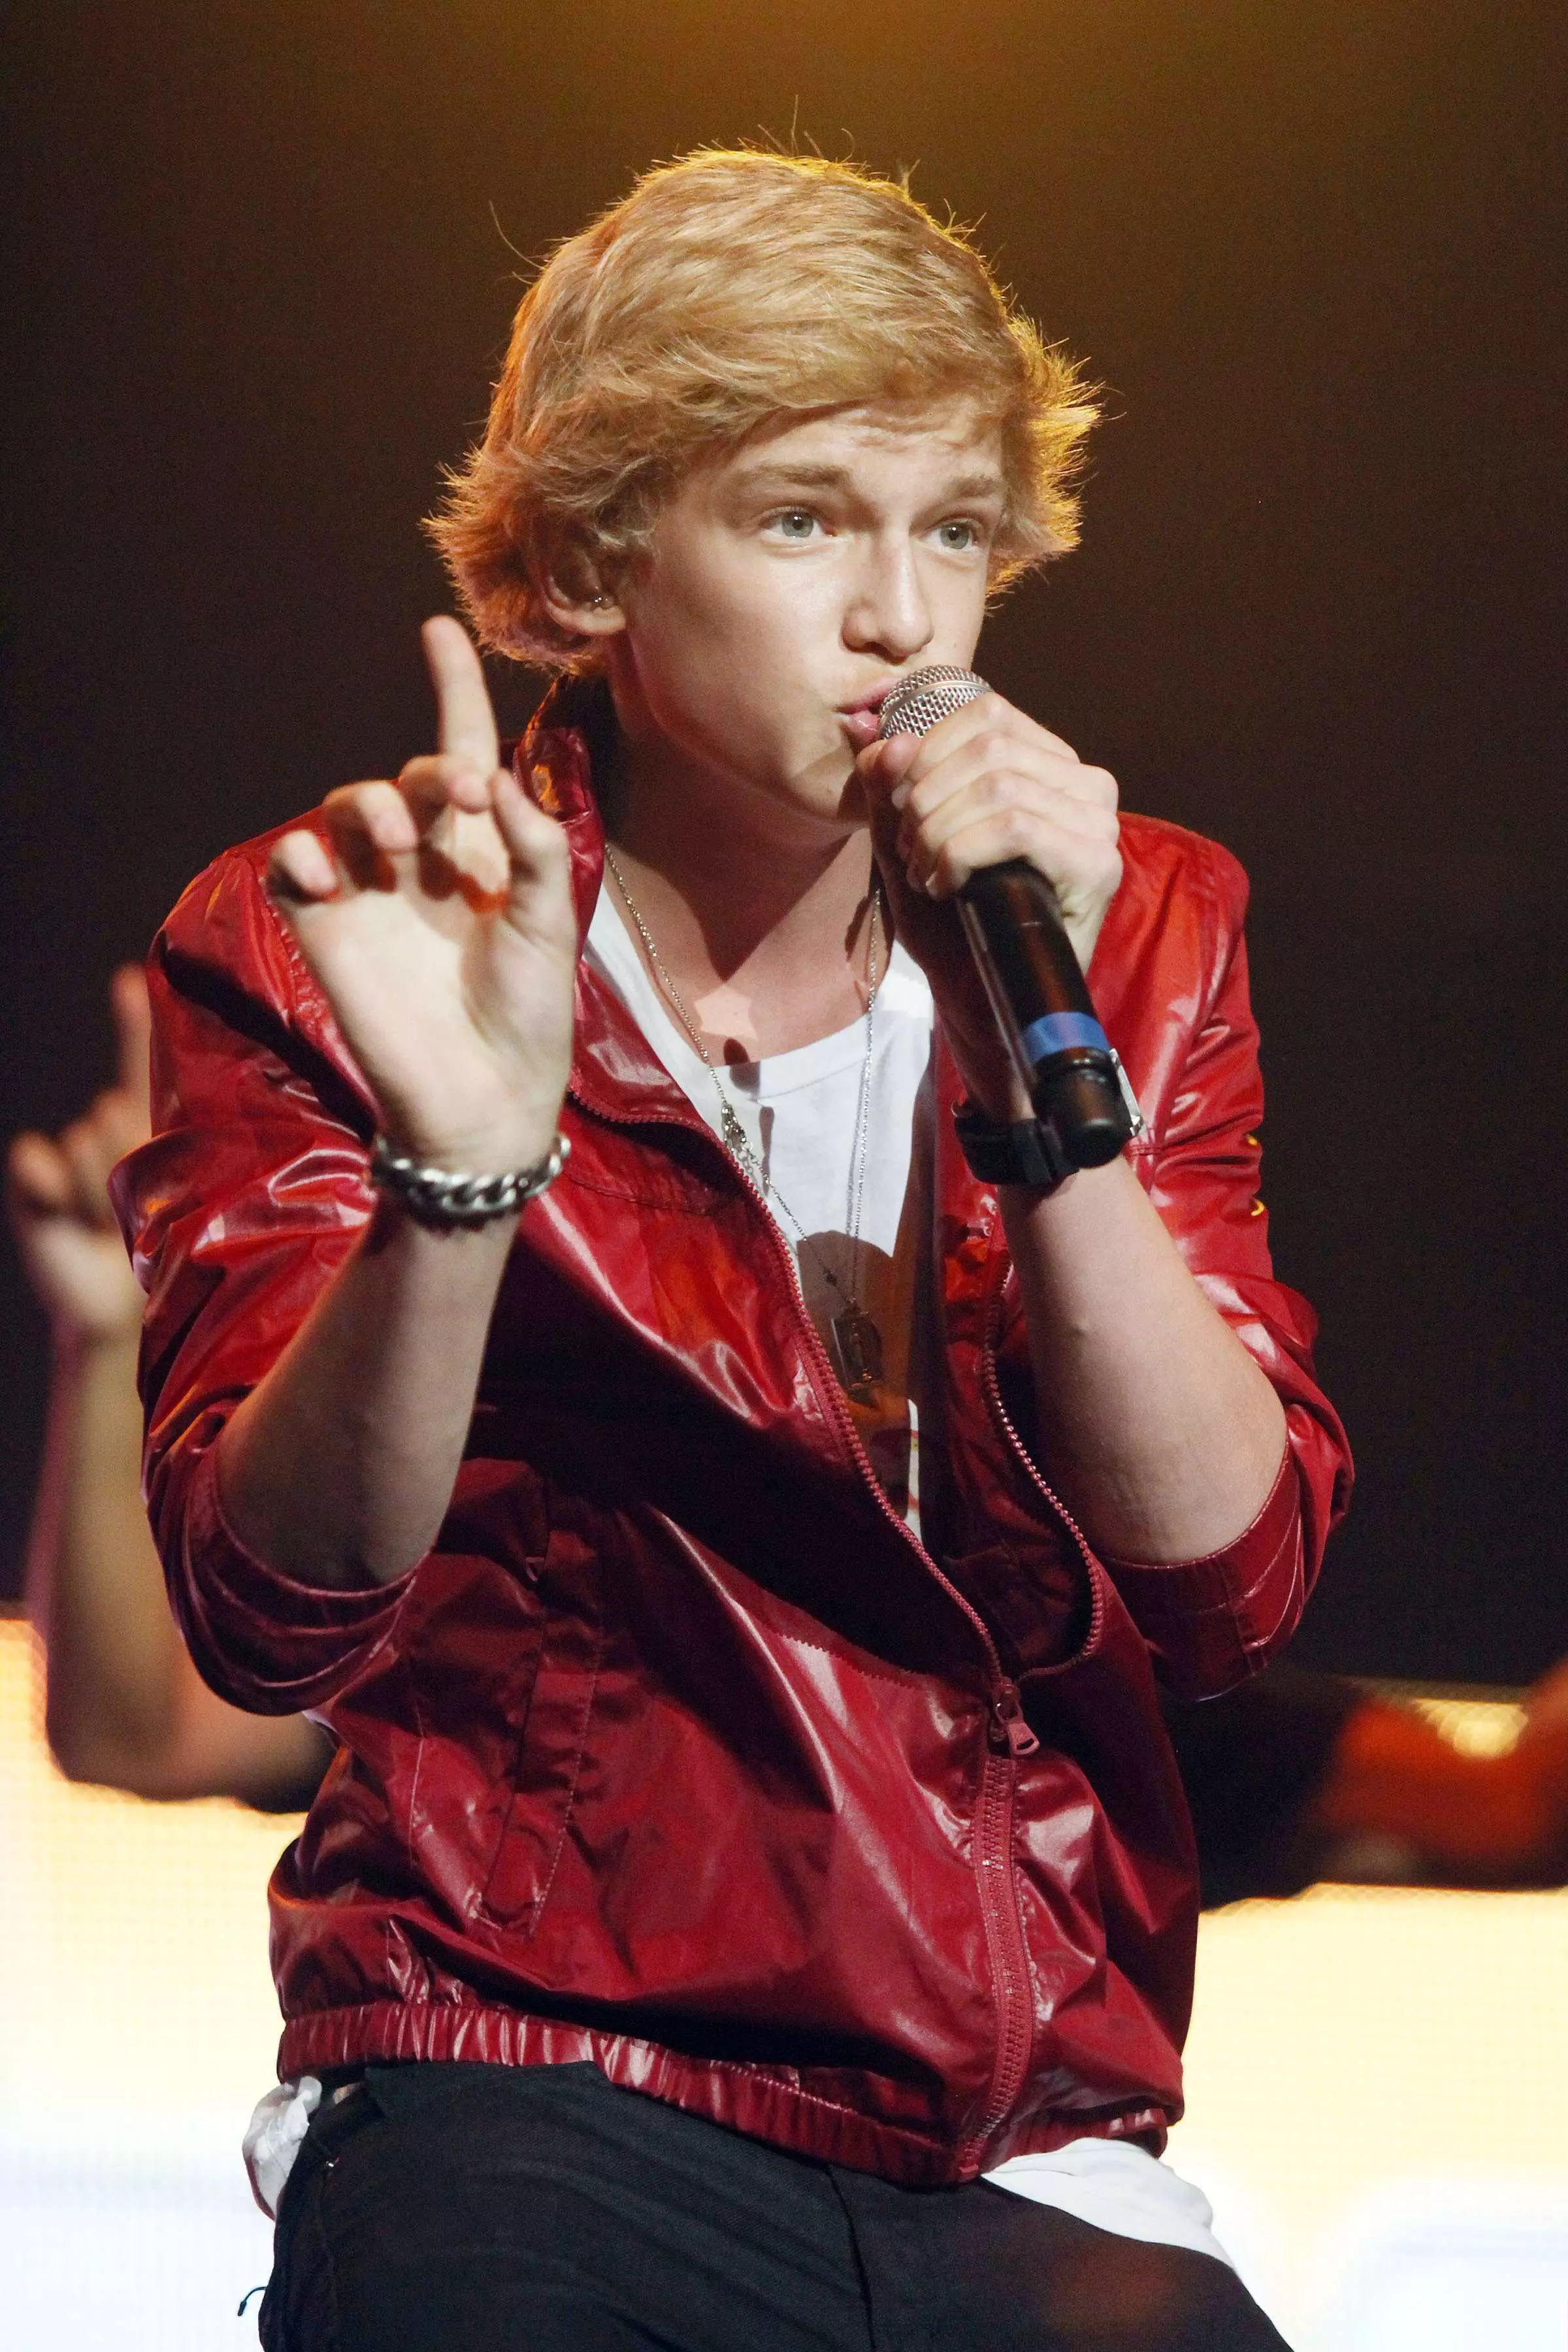 A young Cody Simpson.